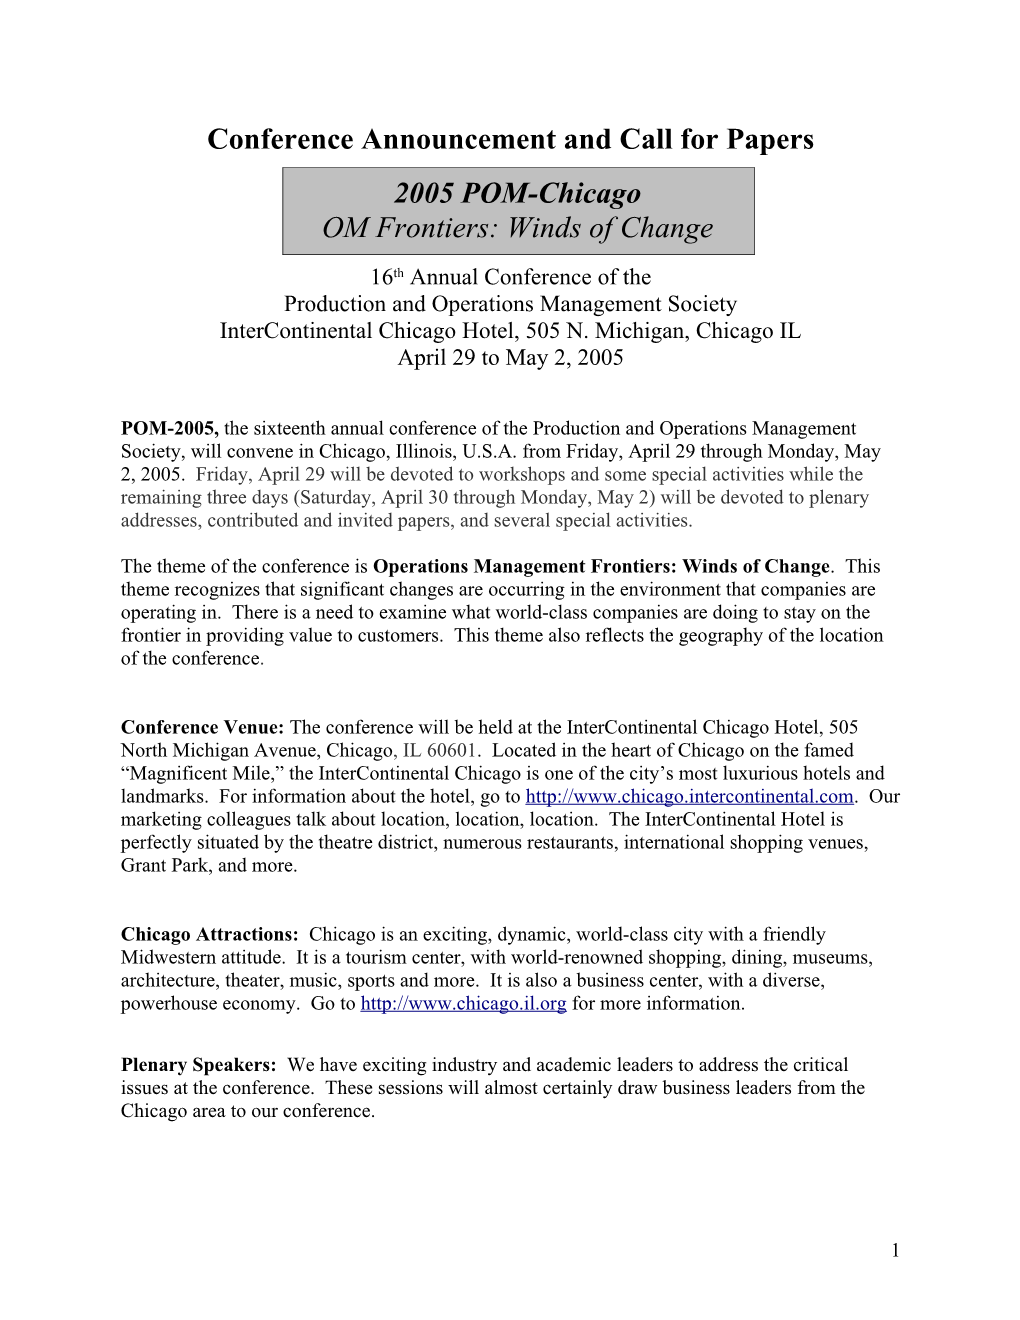 Call for Papers: POMS 2005 Chicago